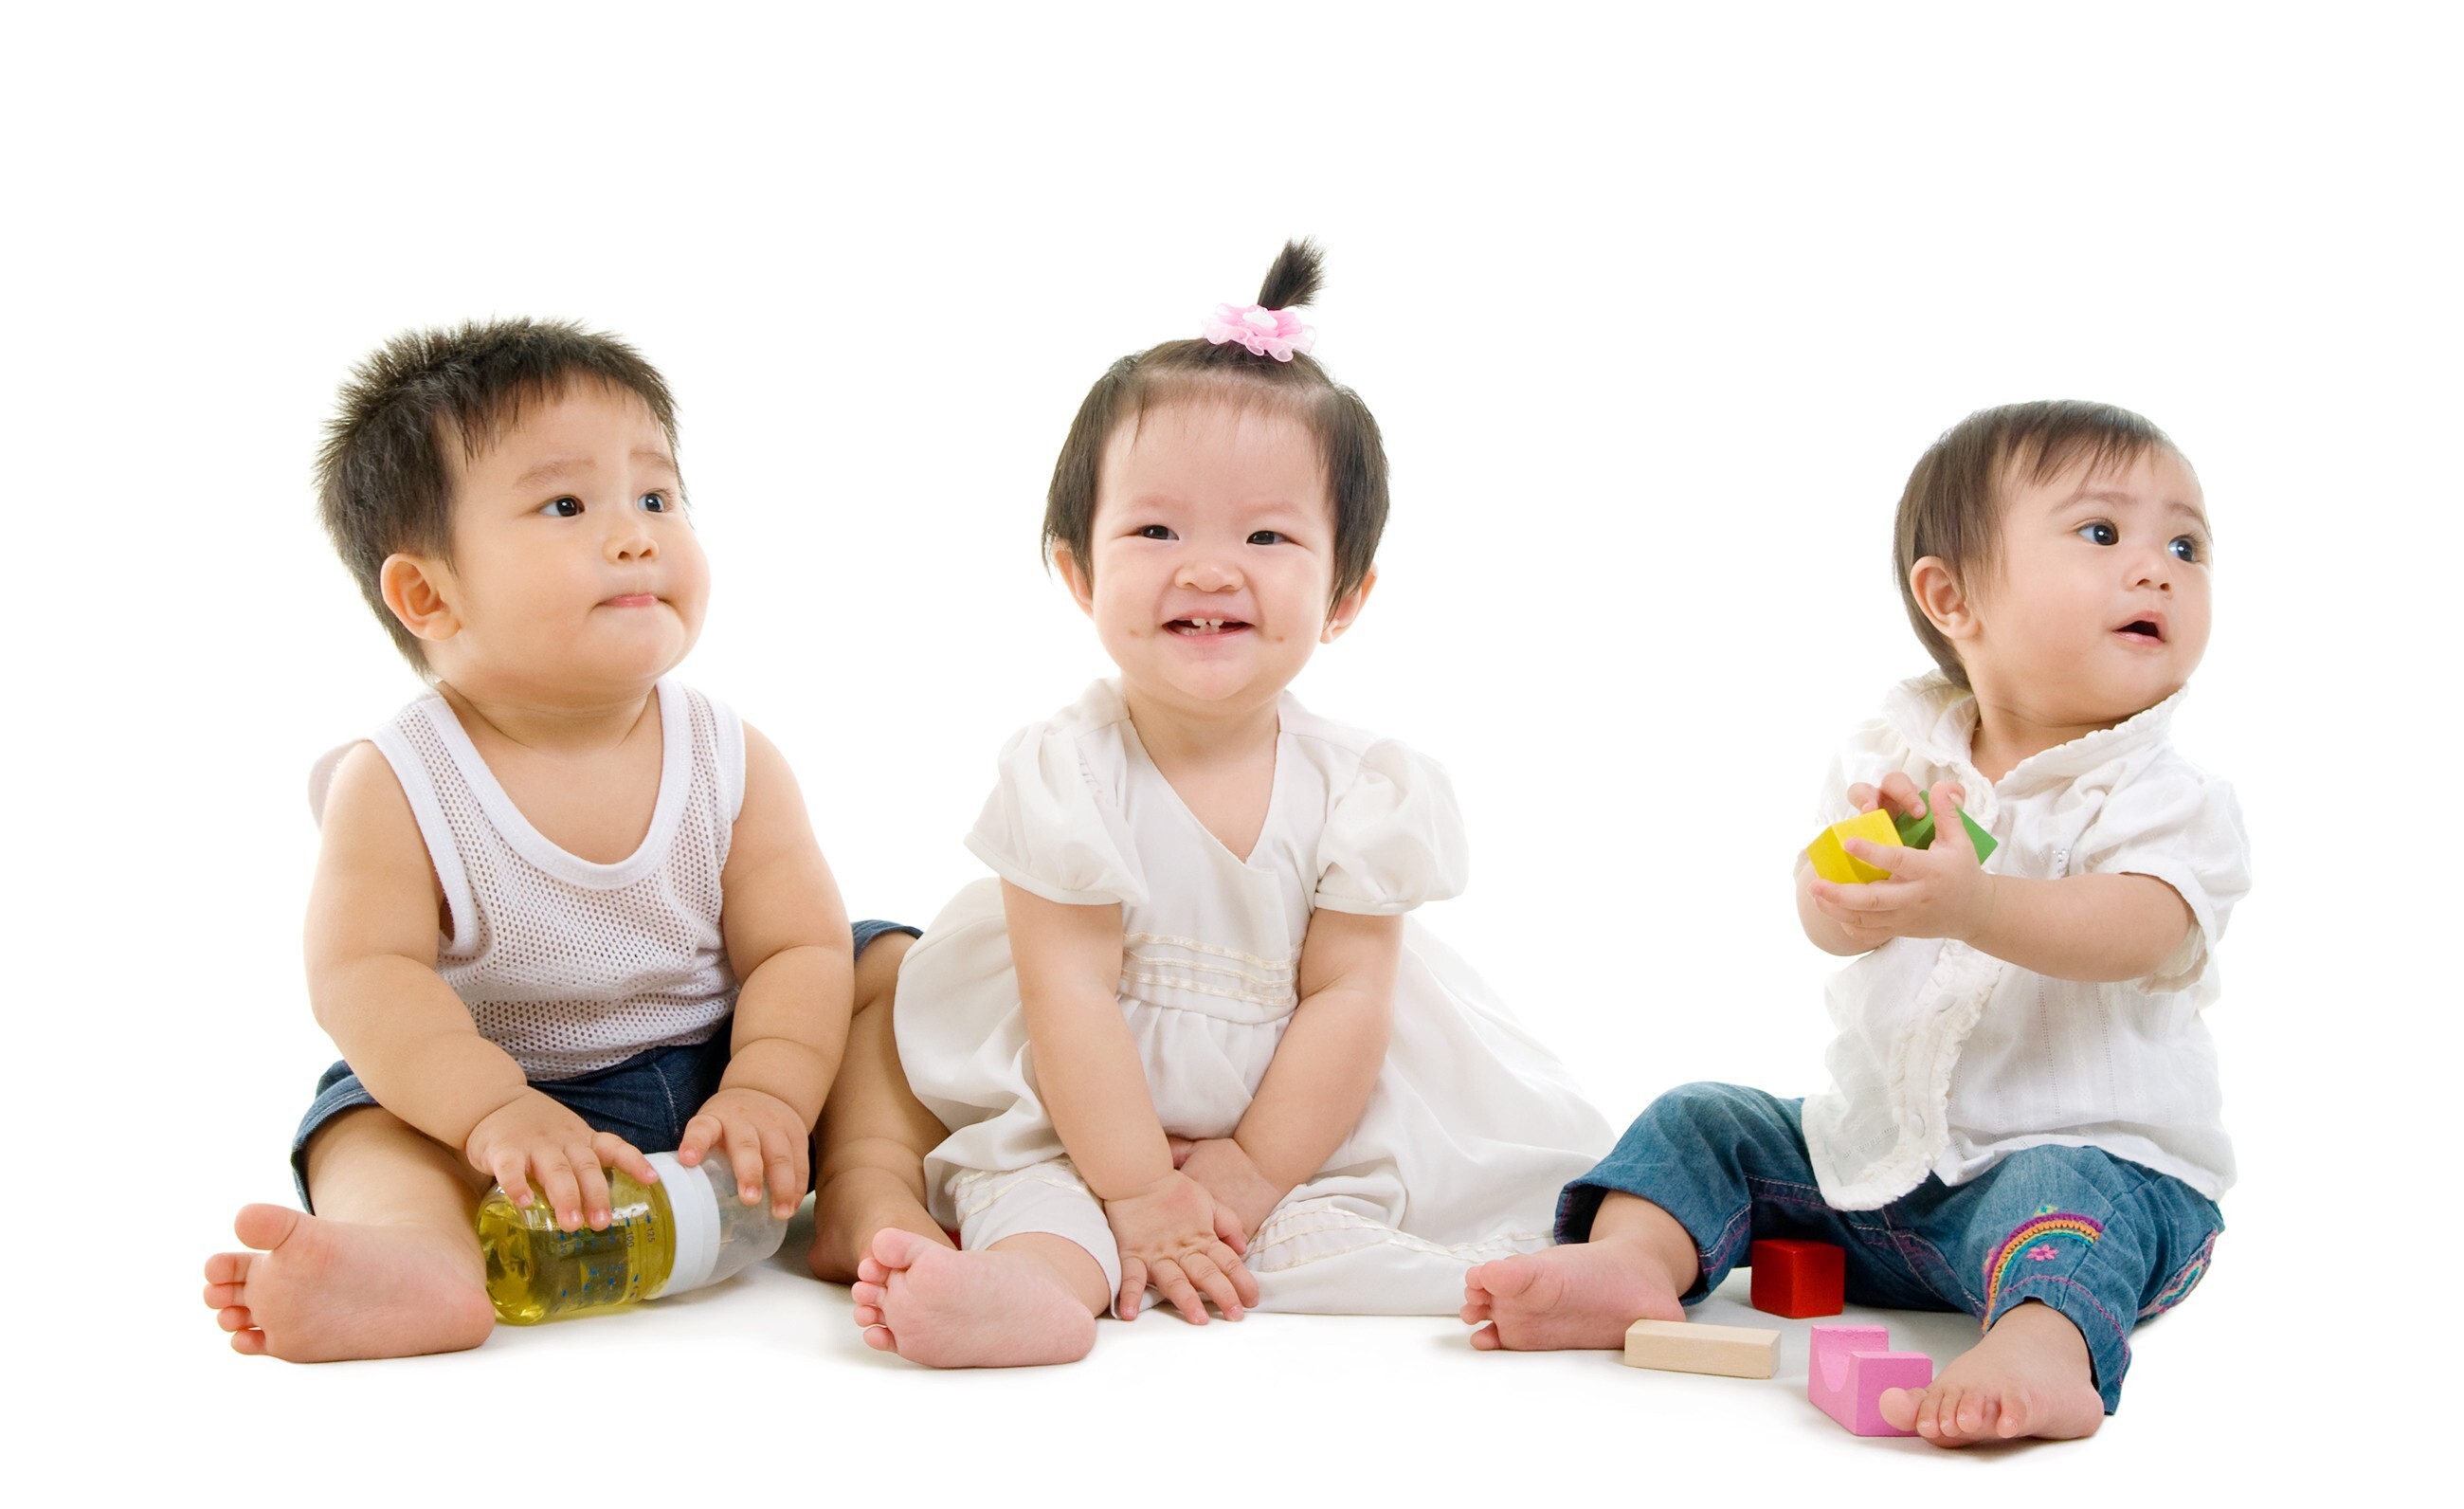 China will allow couples to have three children, in order to increase its population.